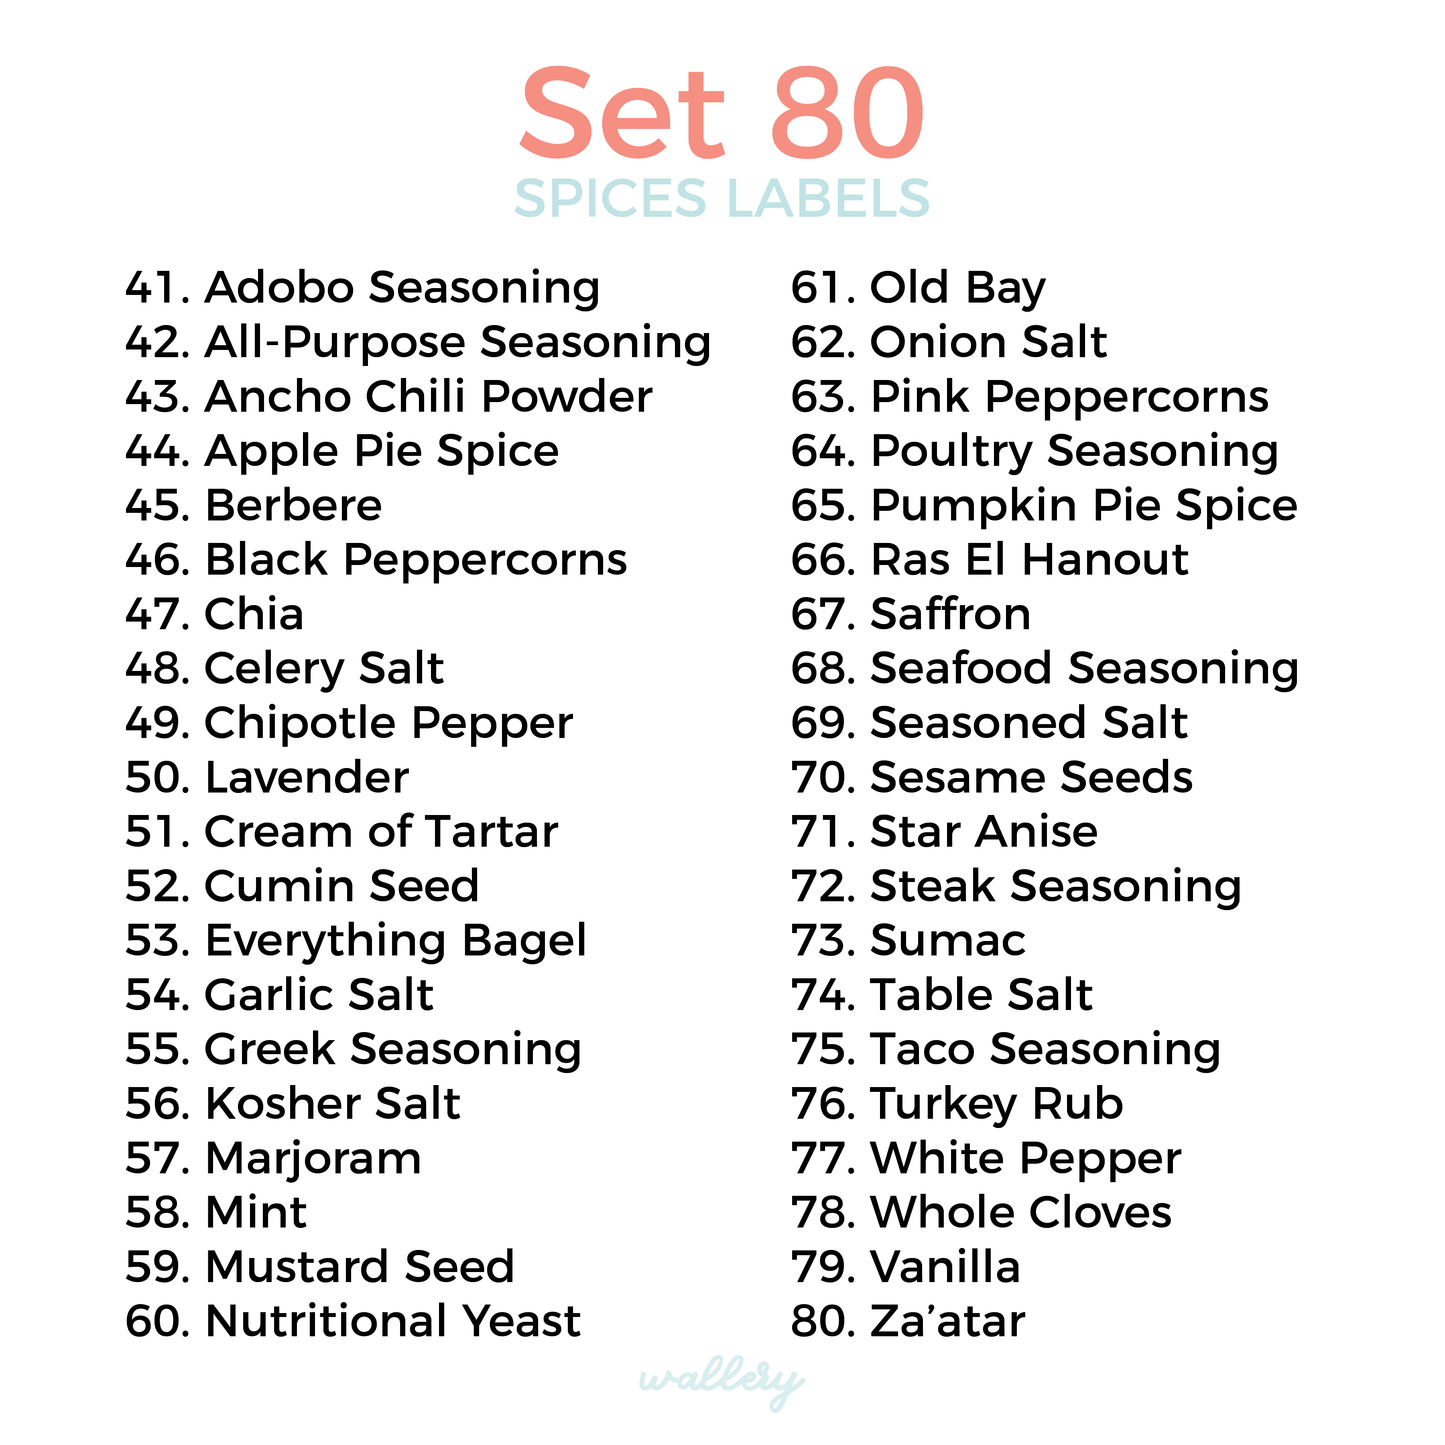 40 Spice Labels